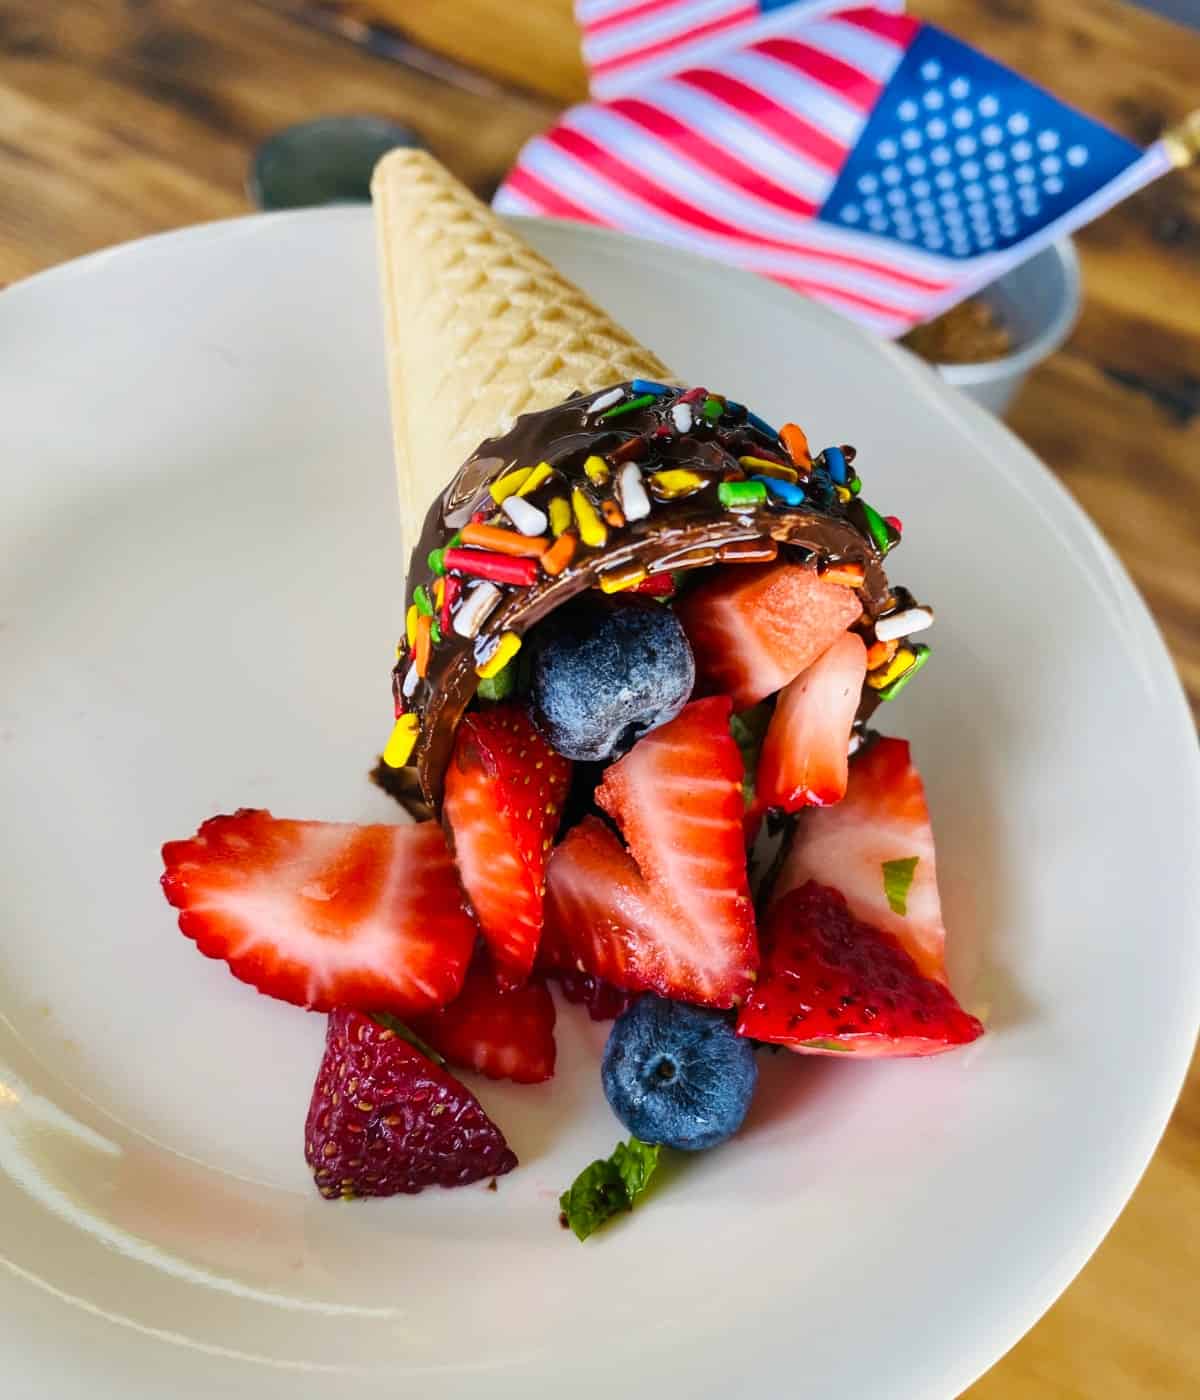 Chocolate dipped ice cream cone filled with fresh berries on white plate with American flag in background.